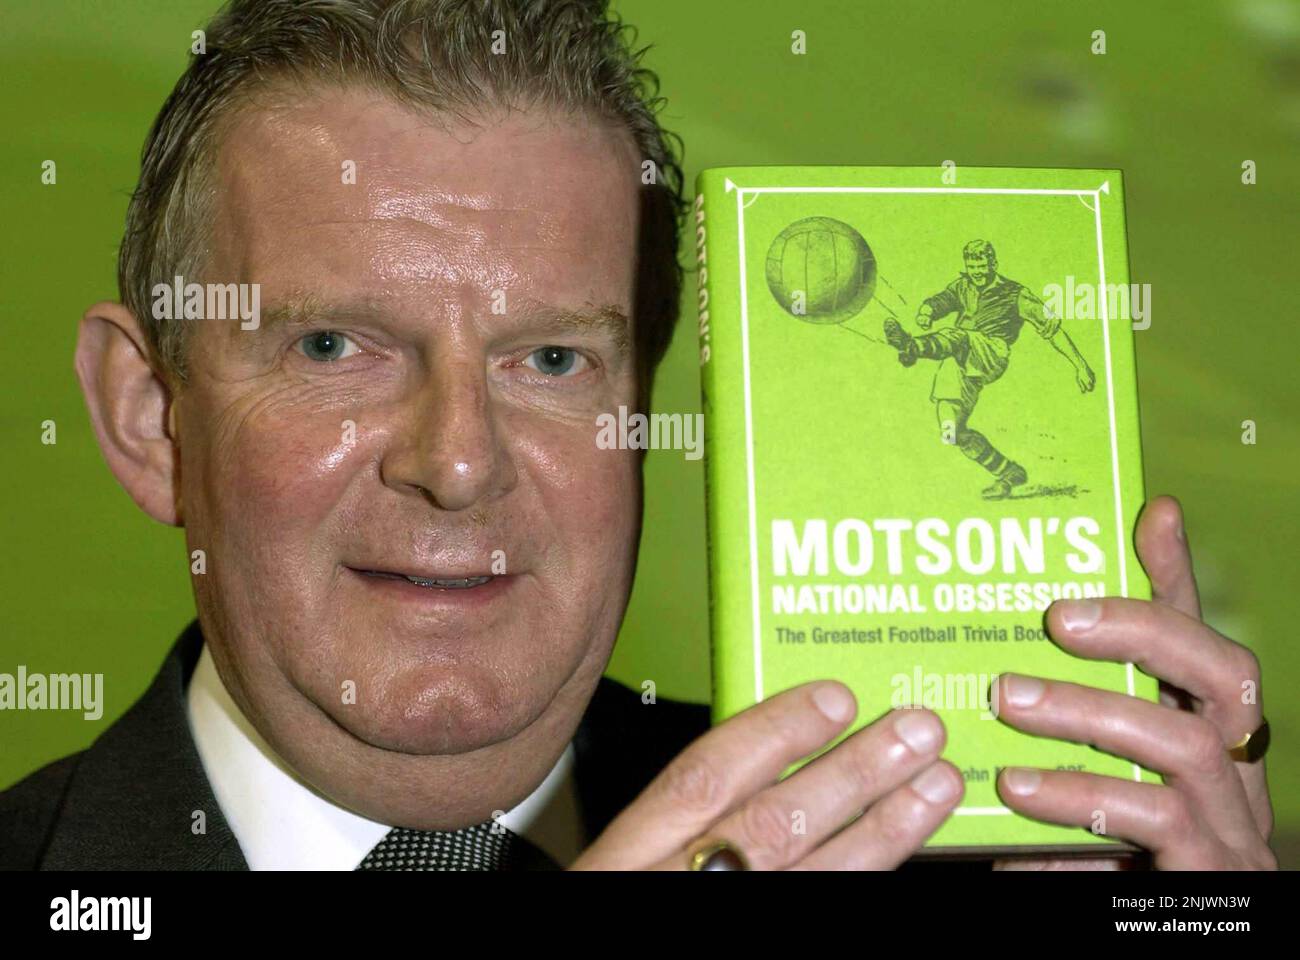 File photo dated 4-05-2004 of Football commentator John Motson during a book signing at Virgin Megastore in Oxford Street, central London, to promote his new book 'Motson's National Obsession - The Greatest Football Trivia Book Ever'. Football commentator John Motson has died at the age of 77, the BBC has announced. Issue date: Thursday February 23, 2023. Stock Photo